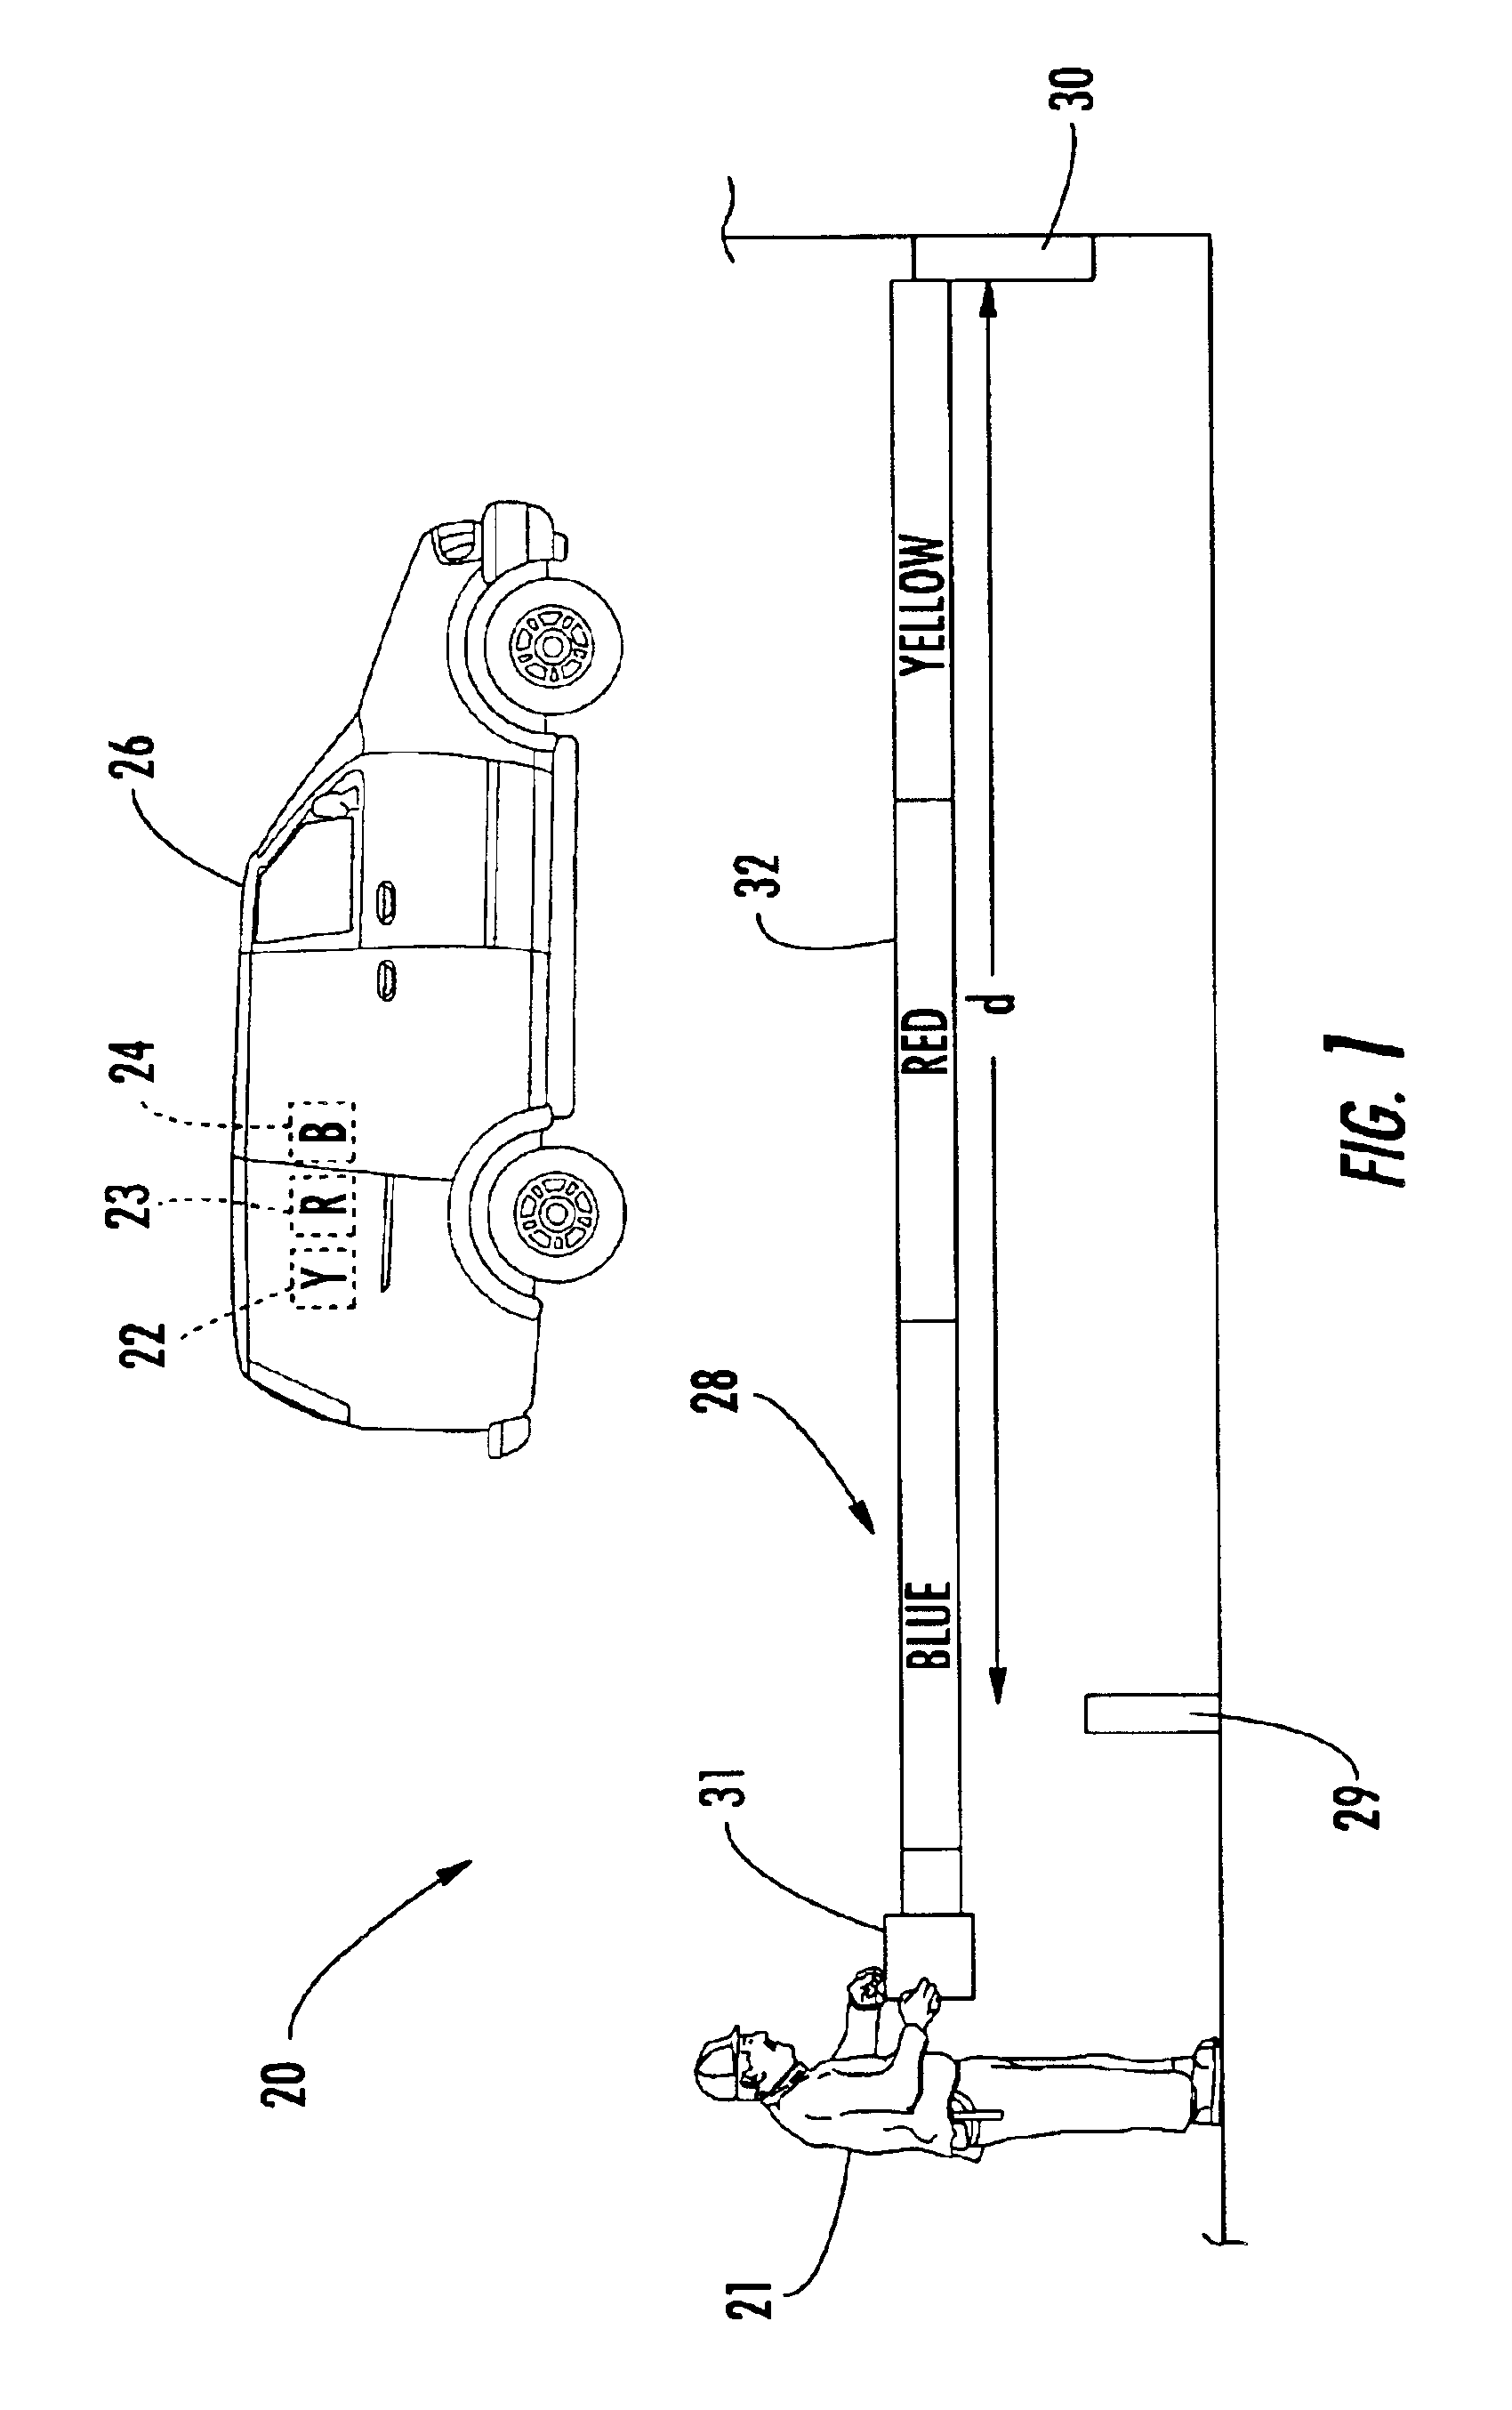 Cable installation system and related methods